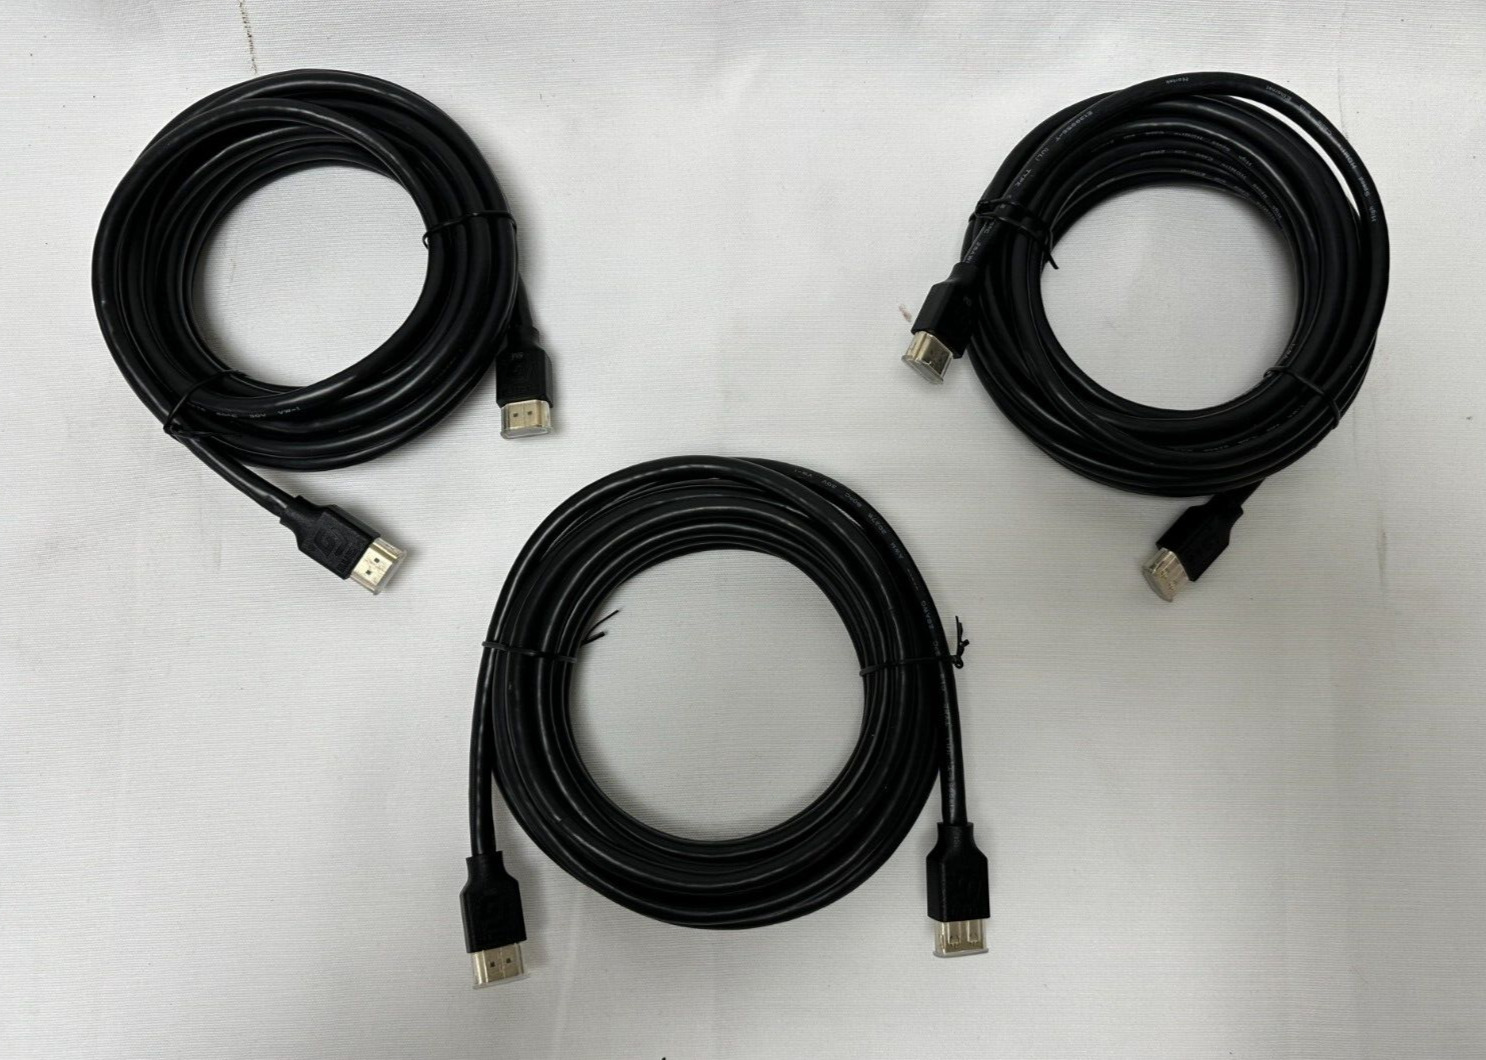 3 pack of Gefen 16ft HDMI cable 